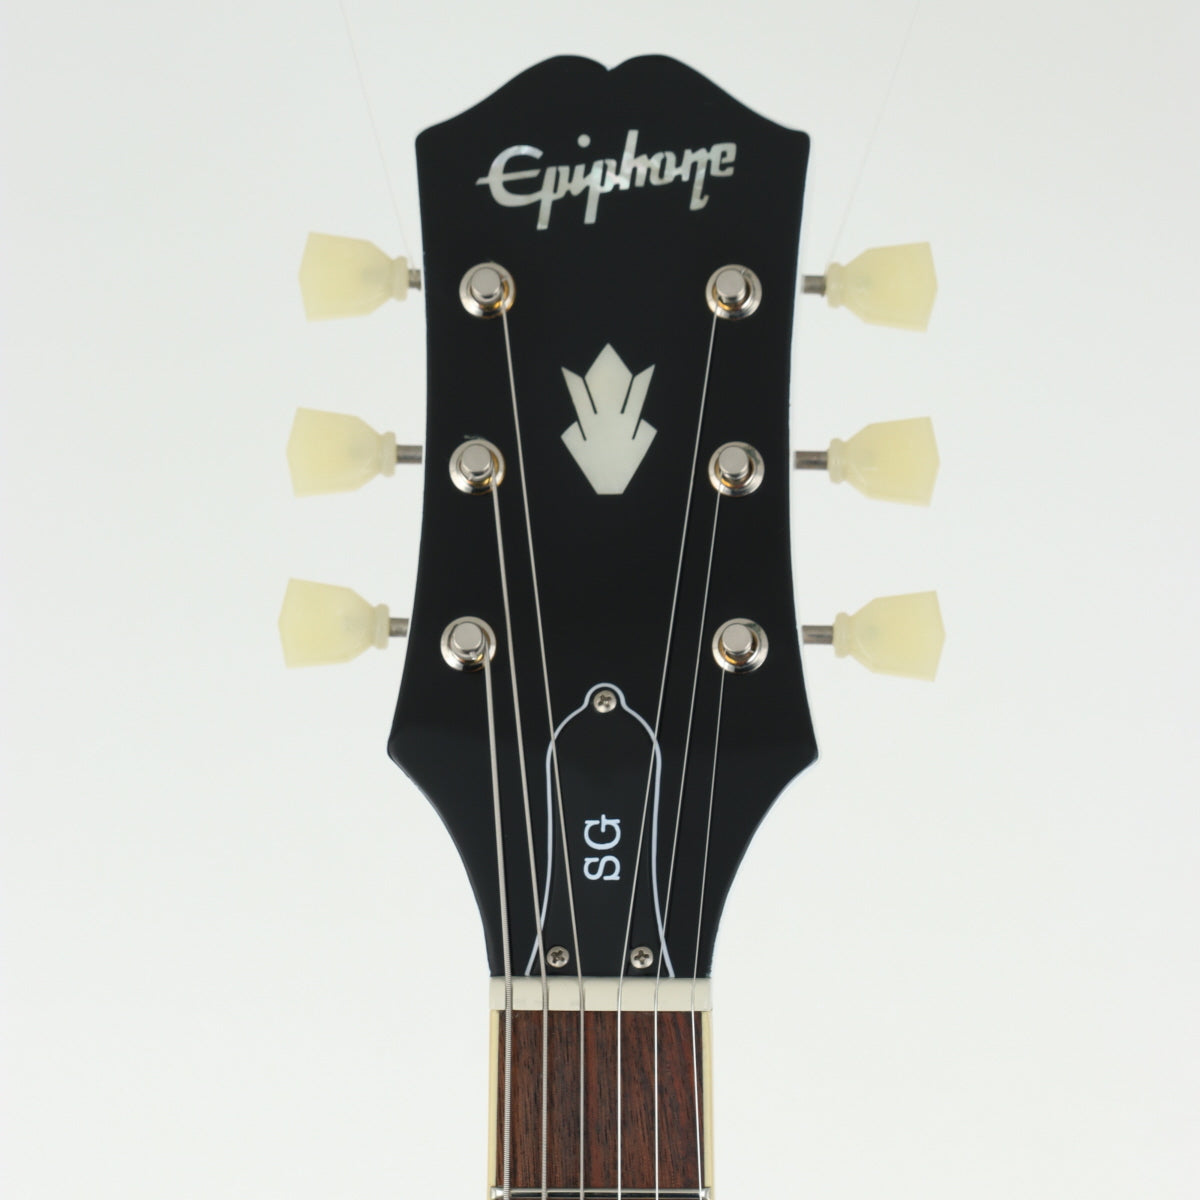 [SN 21101534354] USED Epiphone by Gibson / Inspired by Gibson Collection SG Standard Alpine White [10]